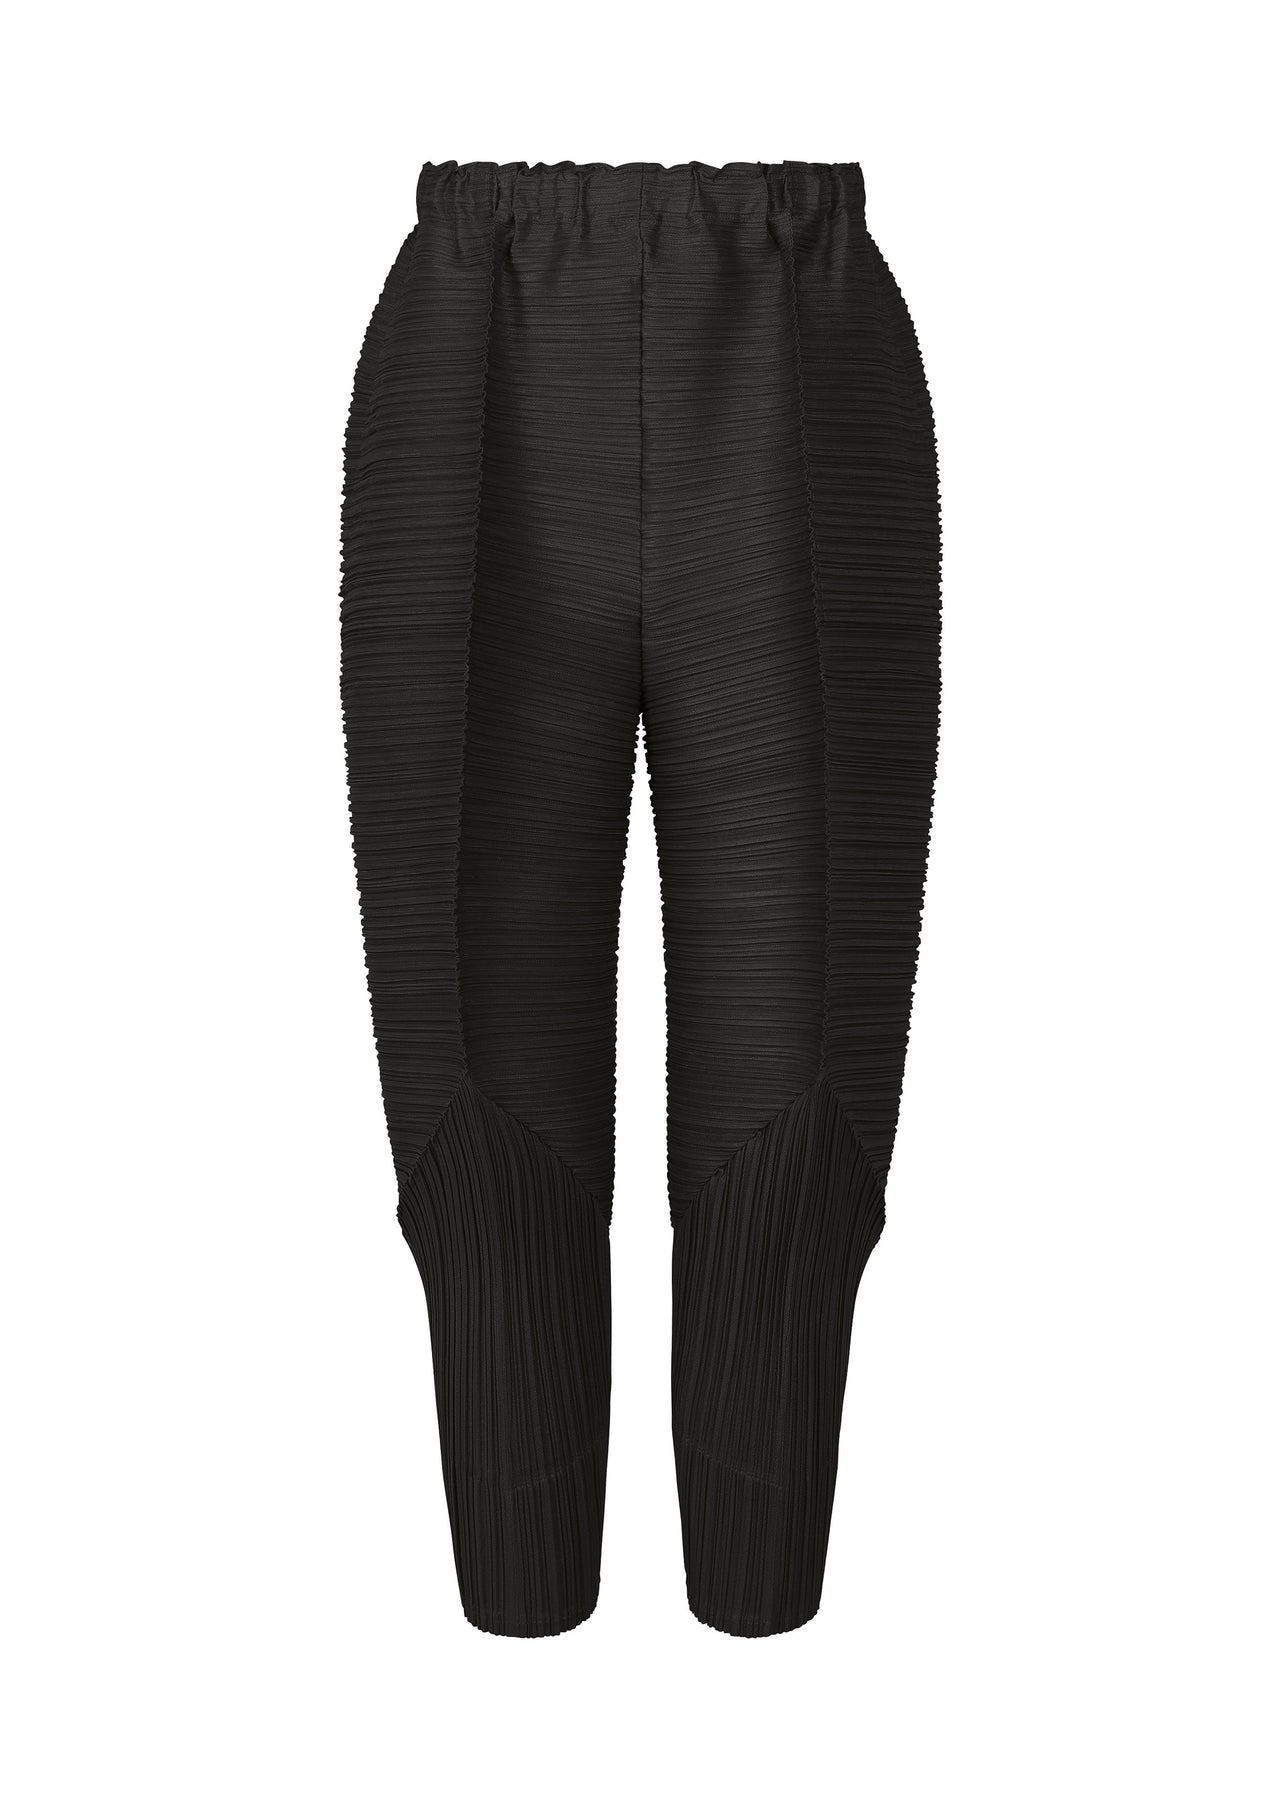 THICKER BOUNCE PANTS | The official ISSEY MIYAKE ONLINE STORE